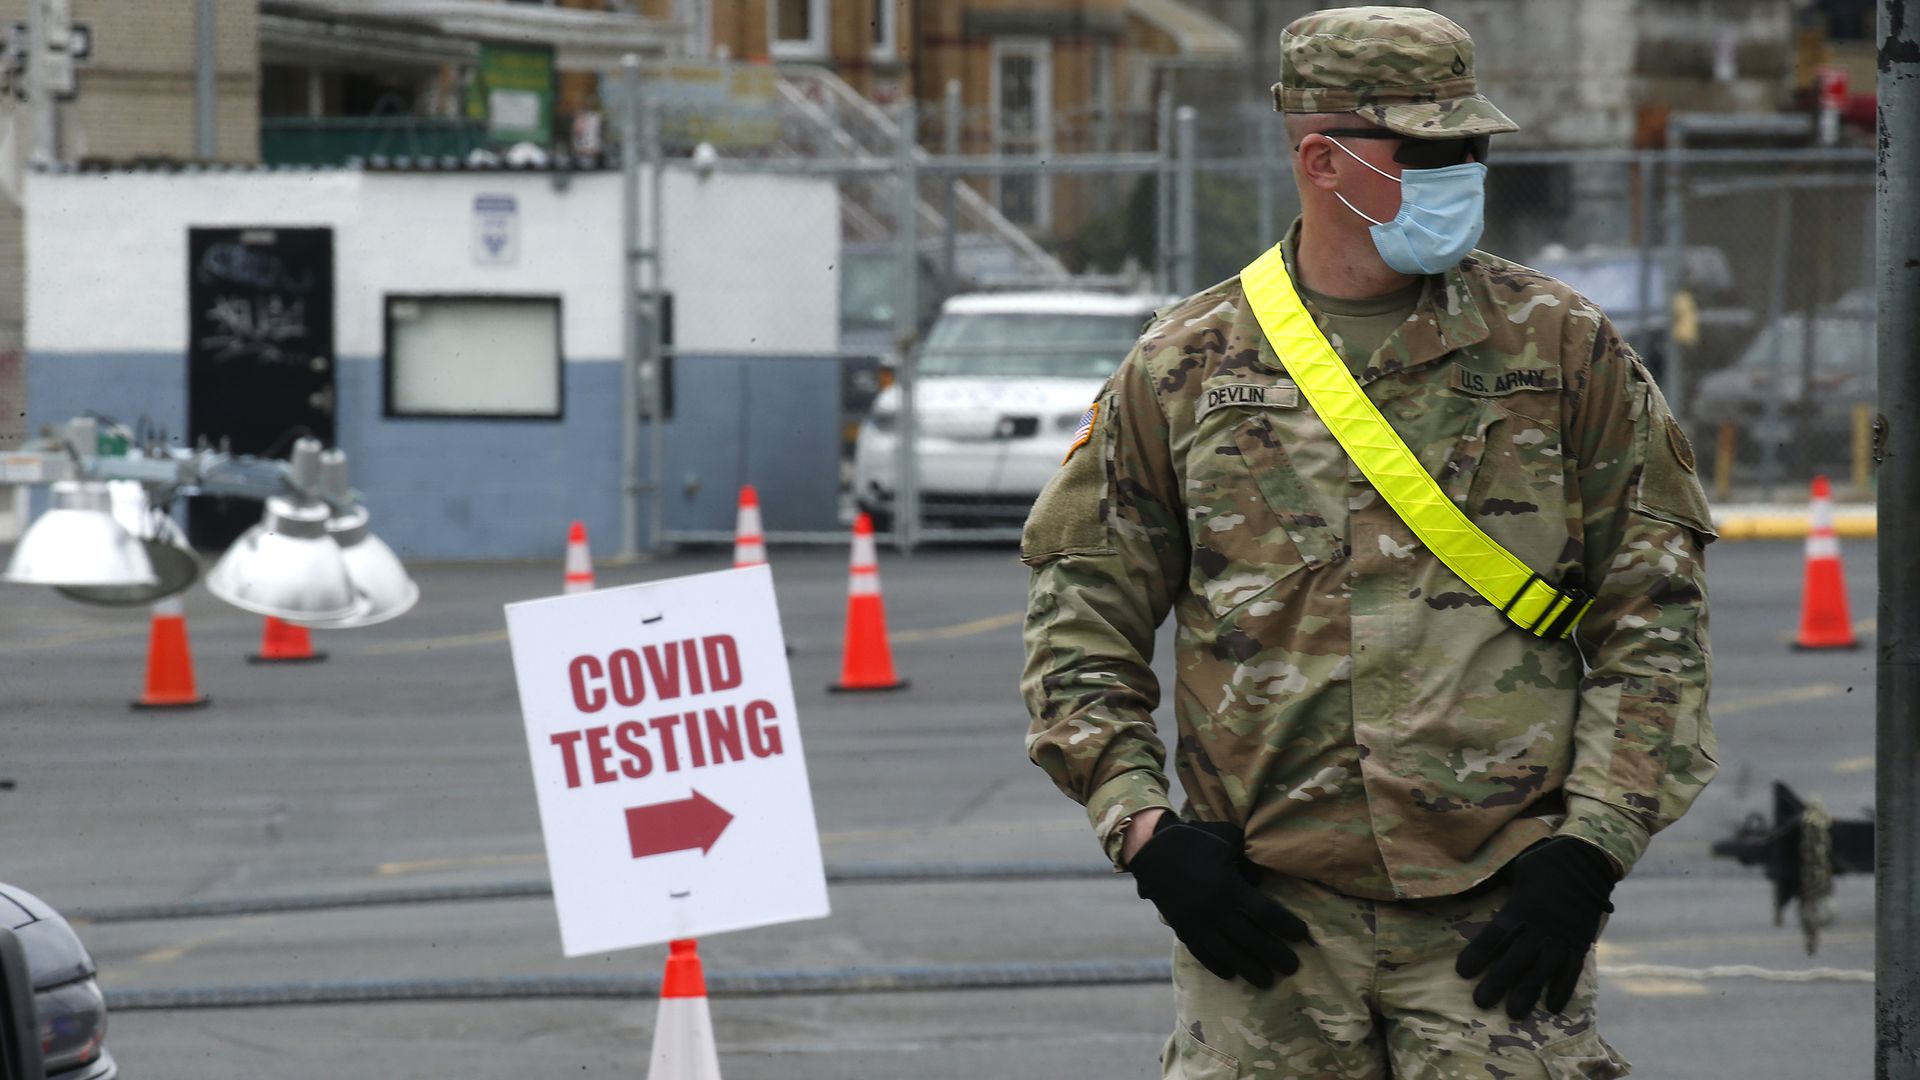 US Army personnel is posted at the entry point to the test site, in Brooklyn, New York,